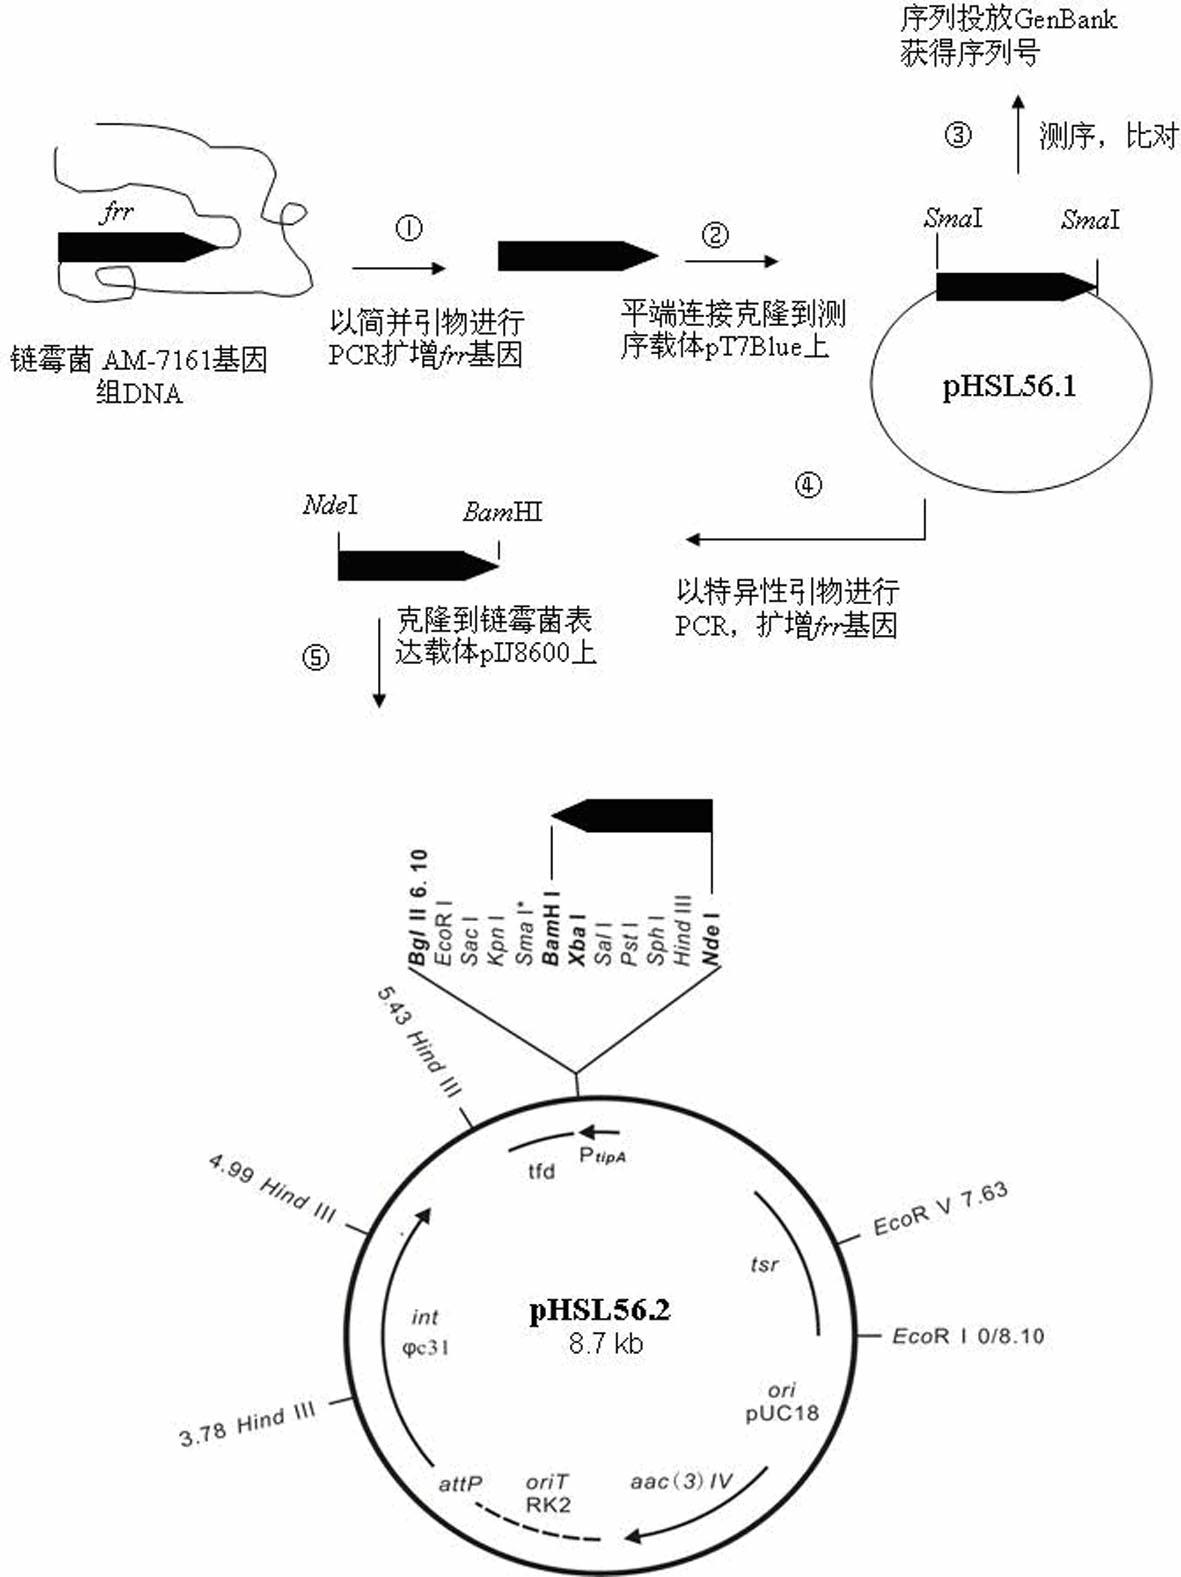 Genetic engineering bacterium capable of promoting biological synthesis of medermycin and application thereof